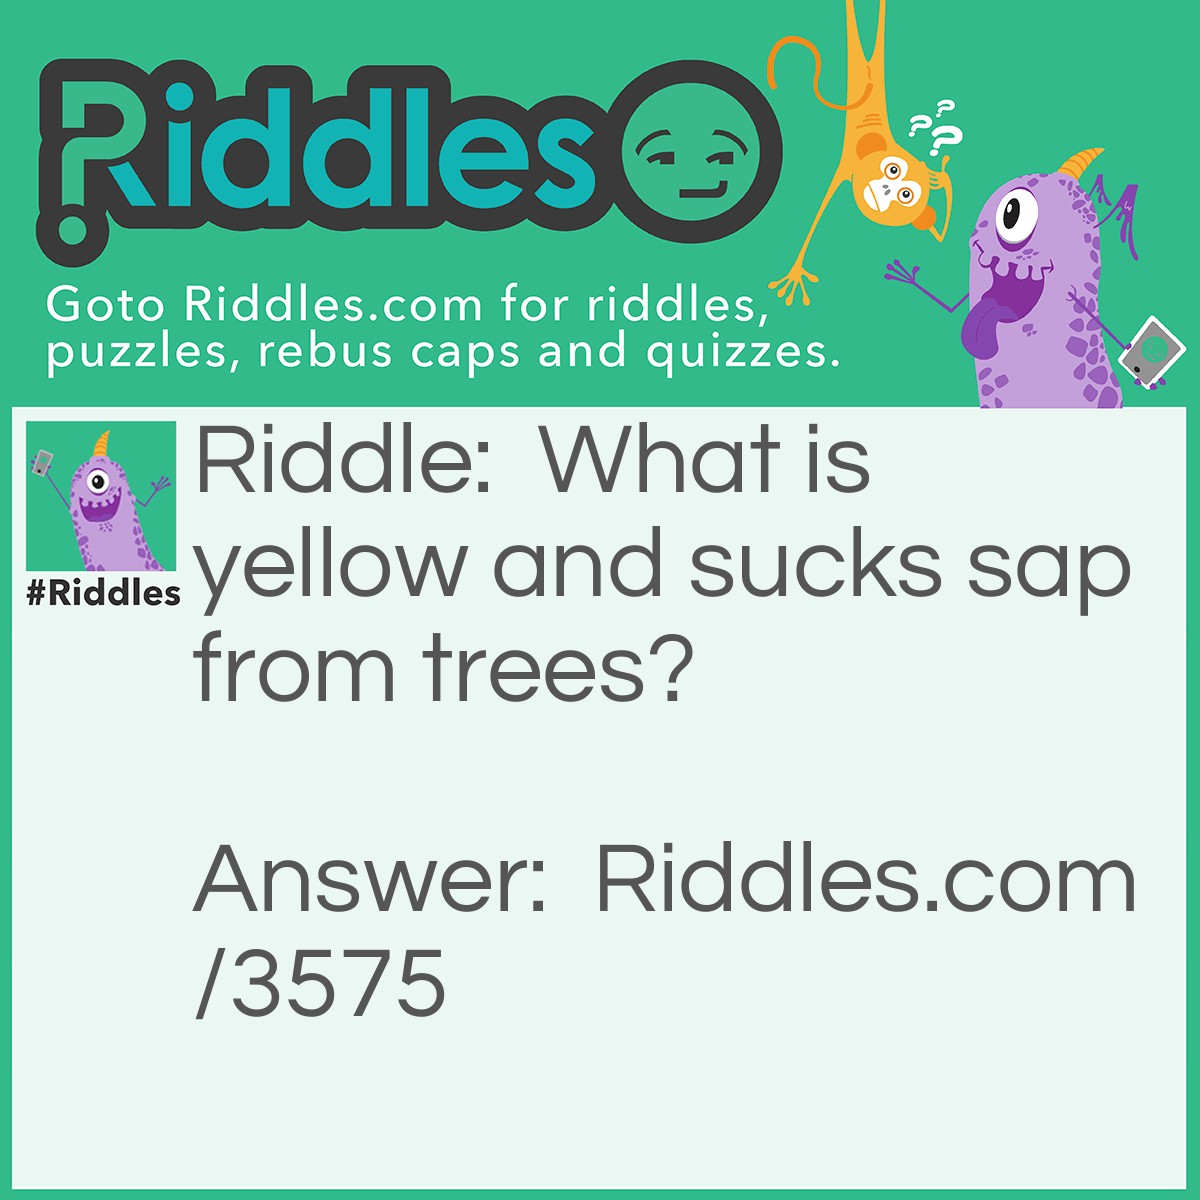 Riddle: What is yellow and sucks sap from trees? Answer: A yellow-bellied sap sucker.